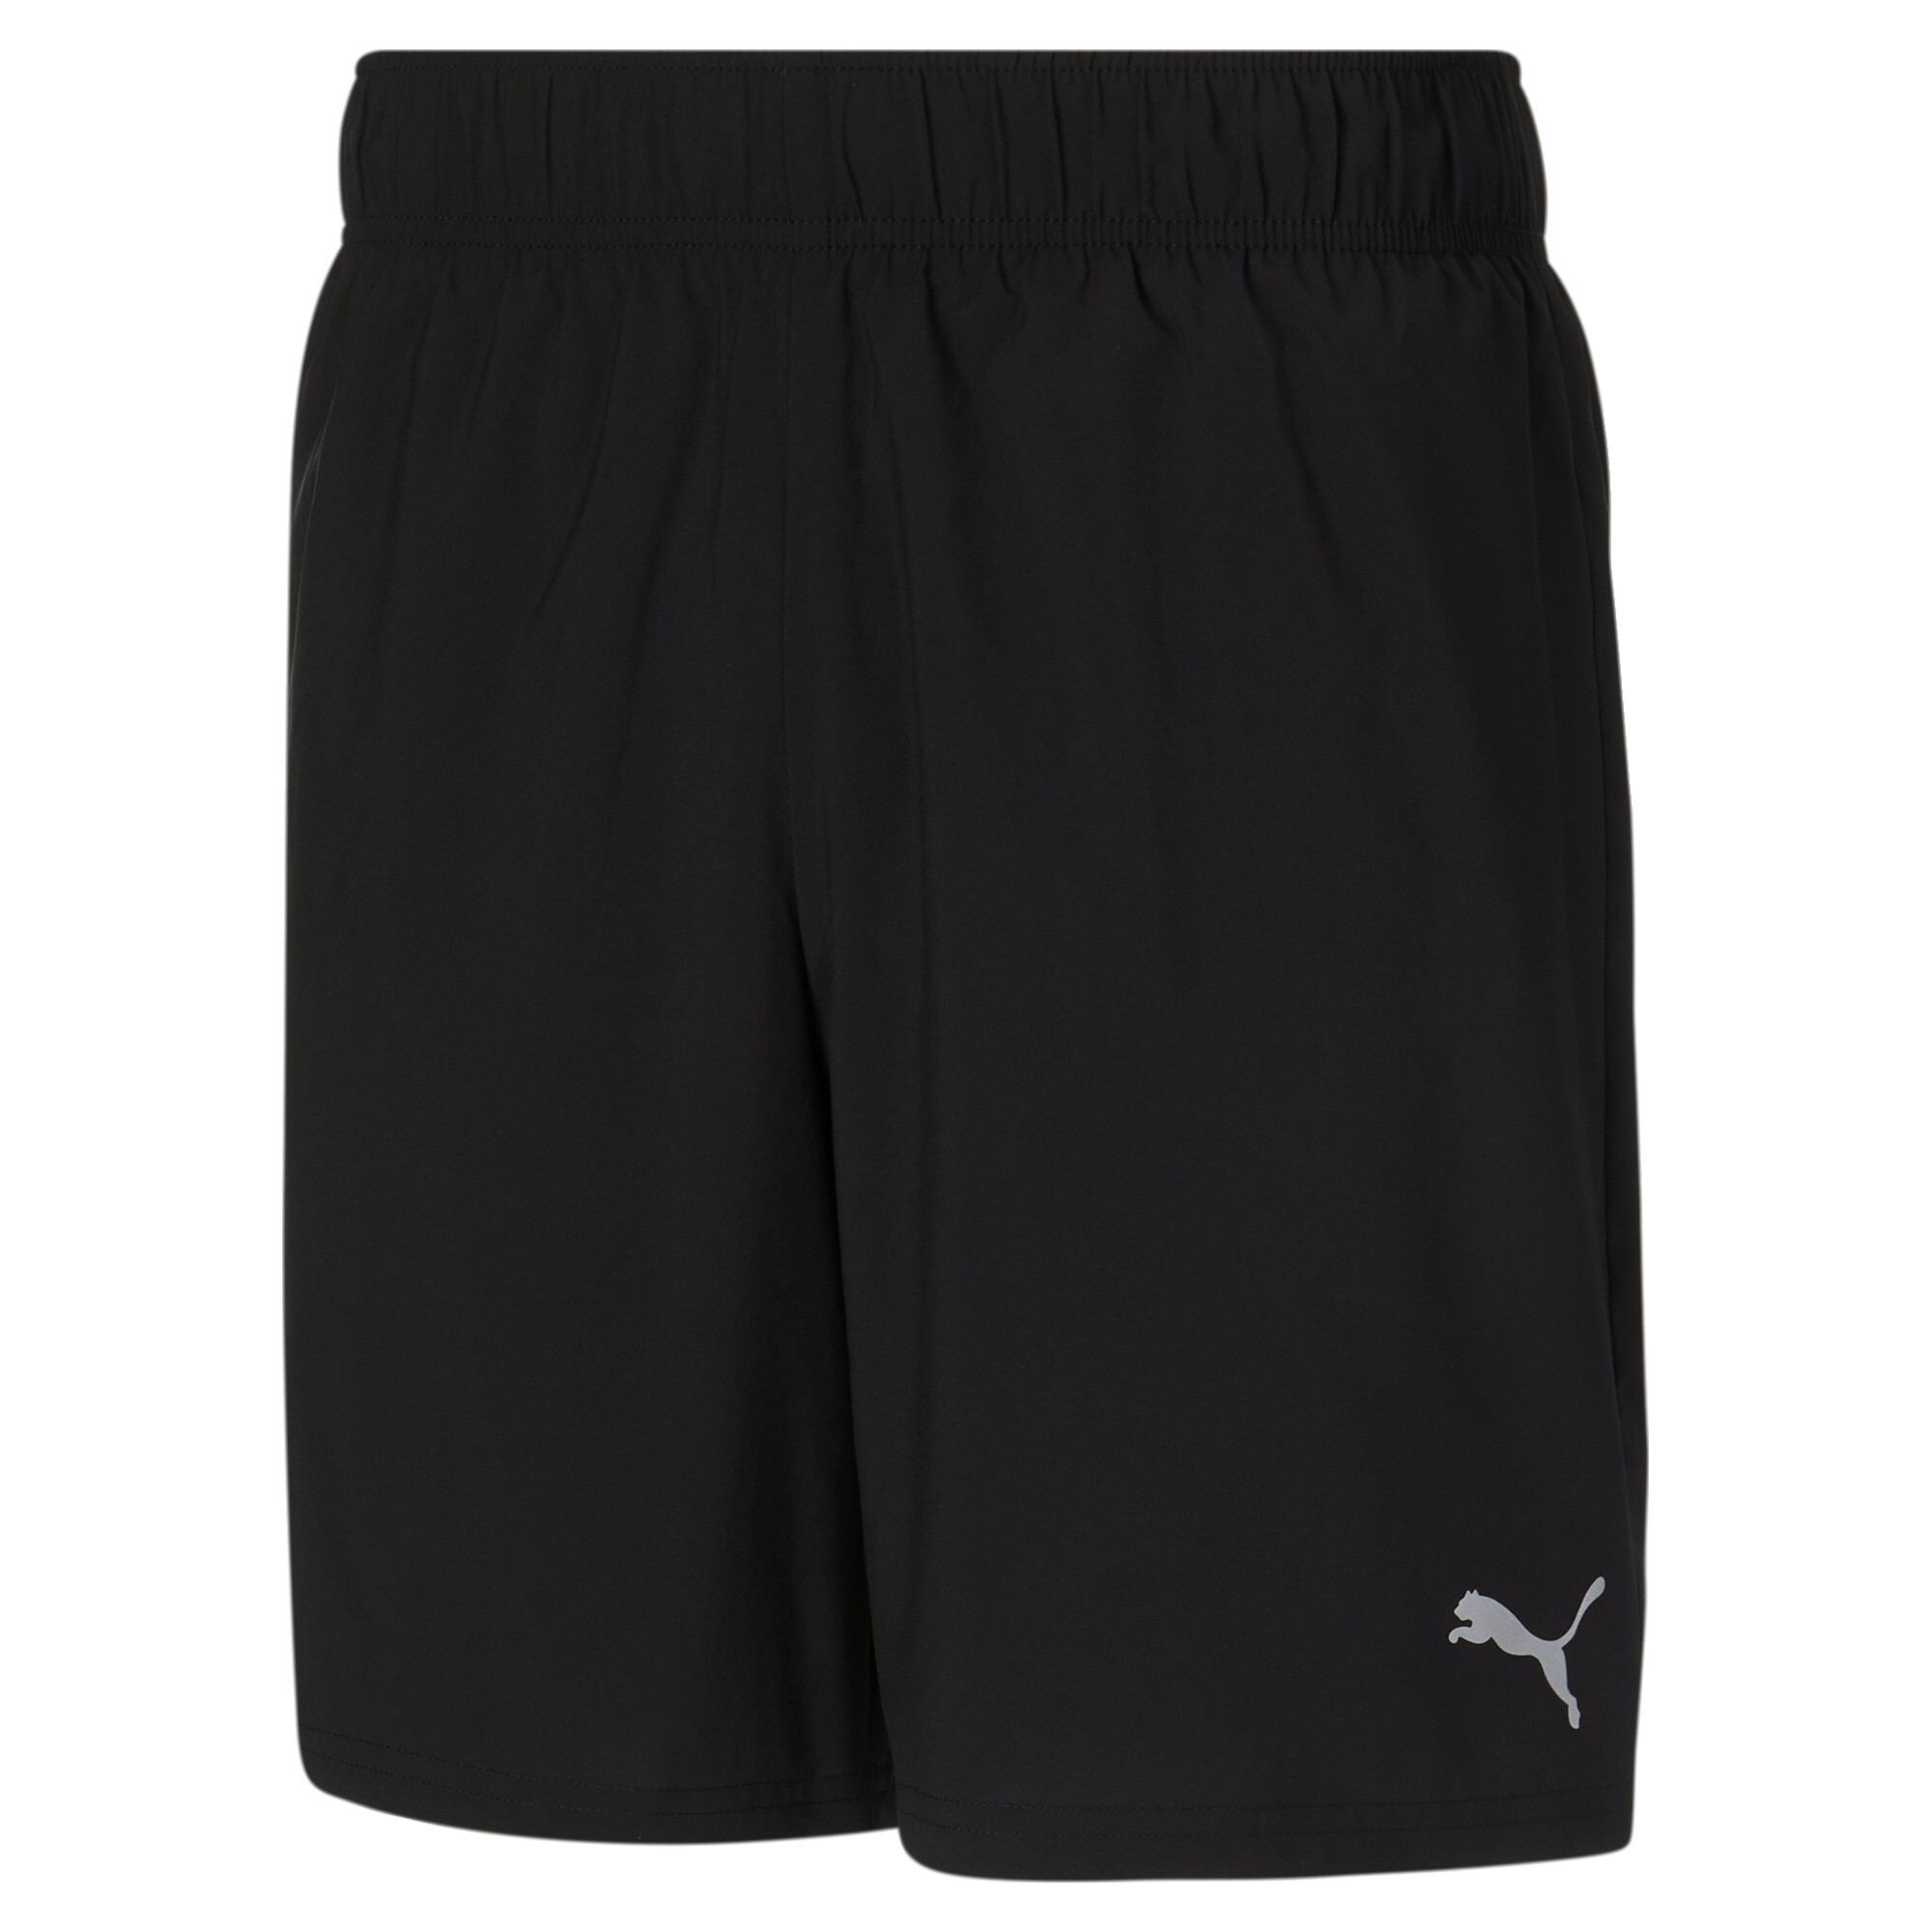 Men's Puma Favourite 2-in-1's Running Shorts, Black, Size L, Clothing